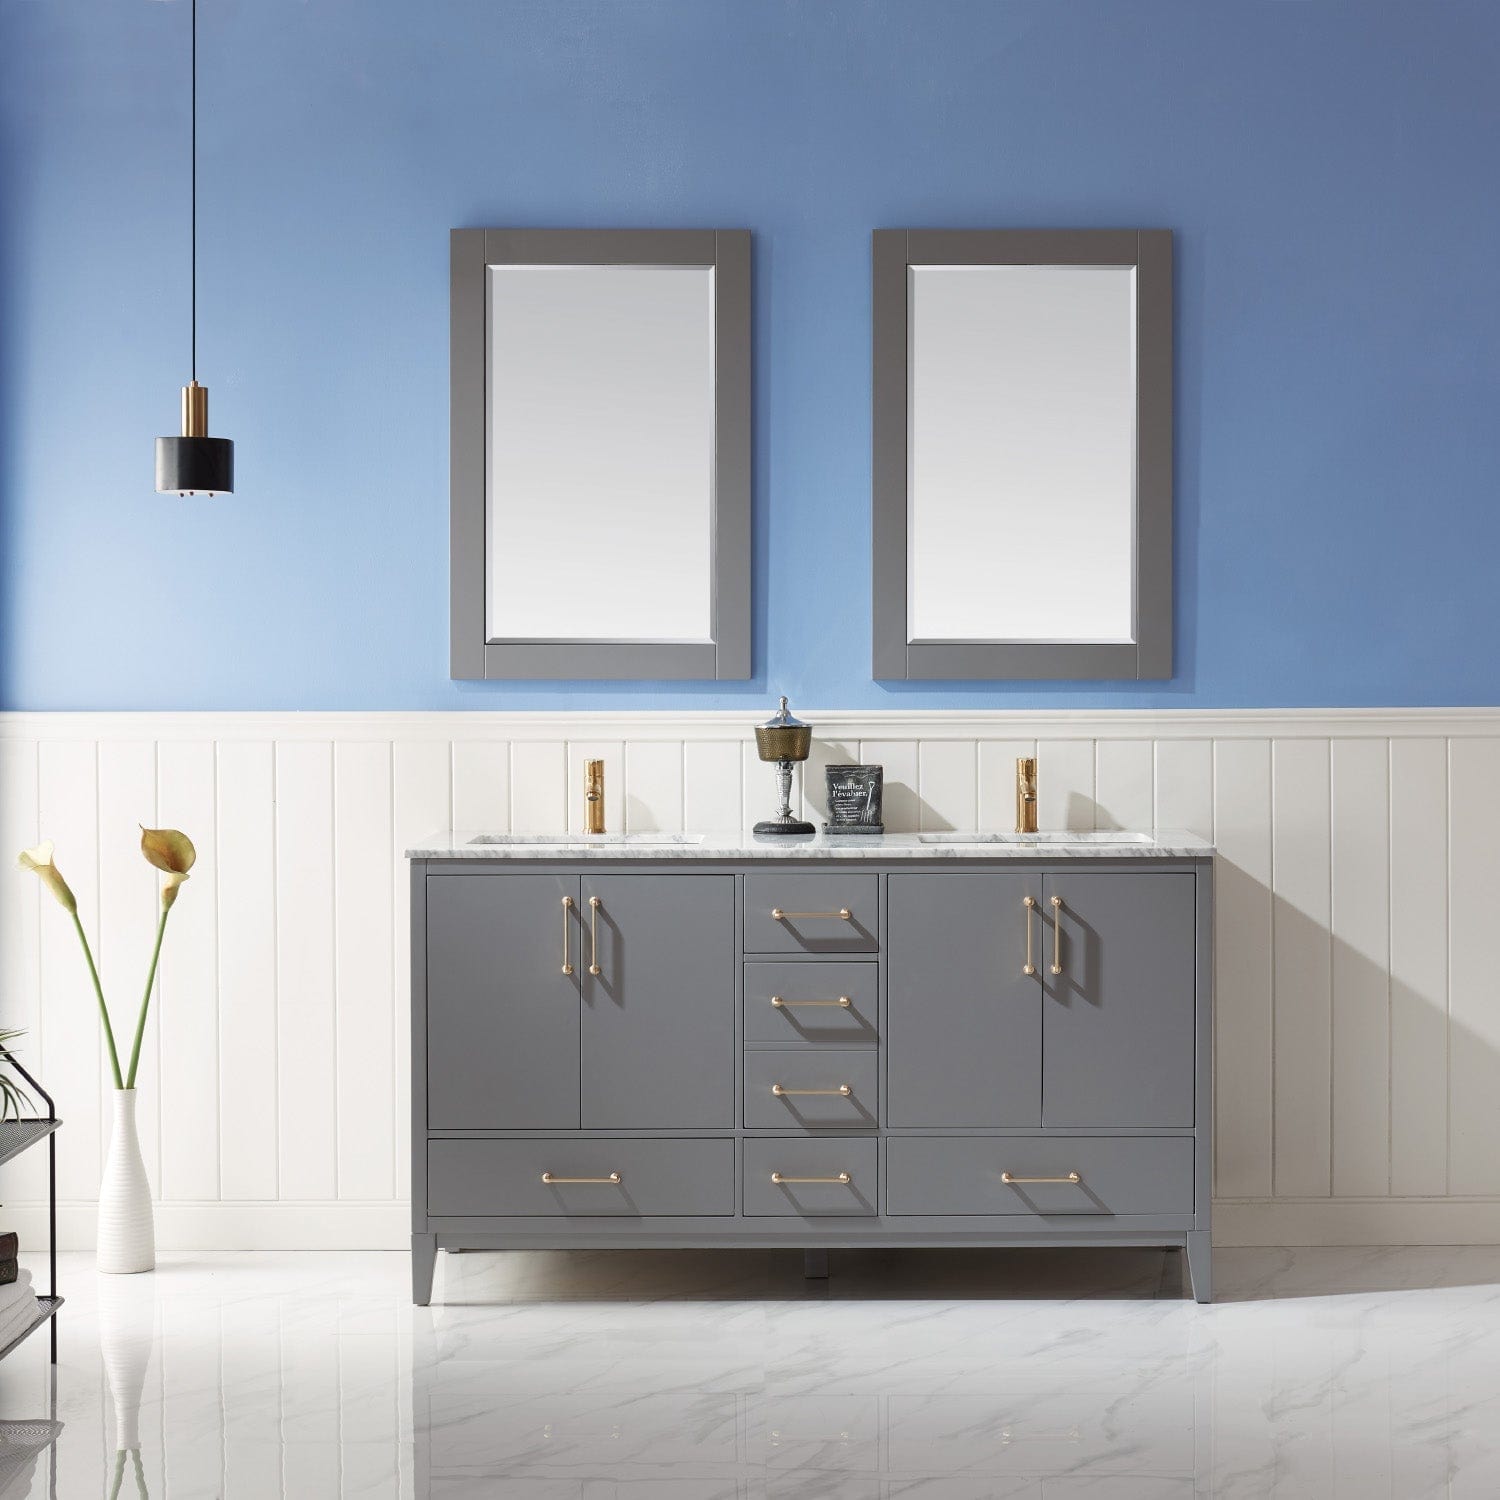 Altair Sutton 60" Double Bathroom Vanity Set in Gray and Carrara White Marble Countertop with Mirror 541060-GR-CA - Molaix631112971935Vanity541060-GR-CA